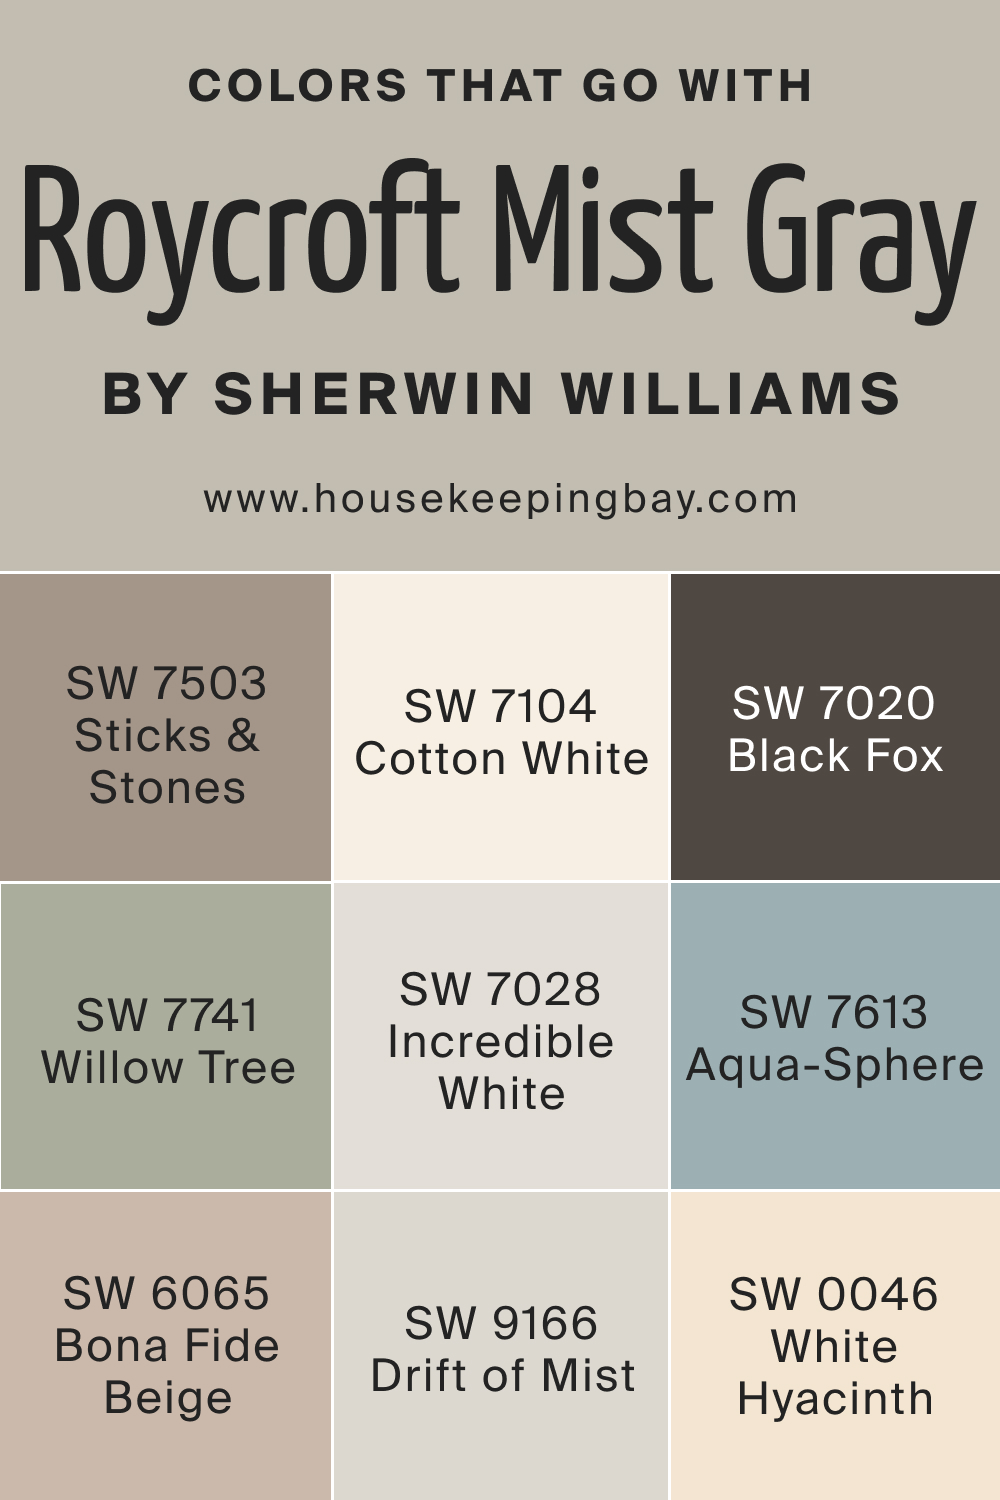 Colors that goes with SW 2844 Roycroft Mist Gray by Sherwin Williams